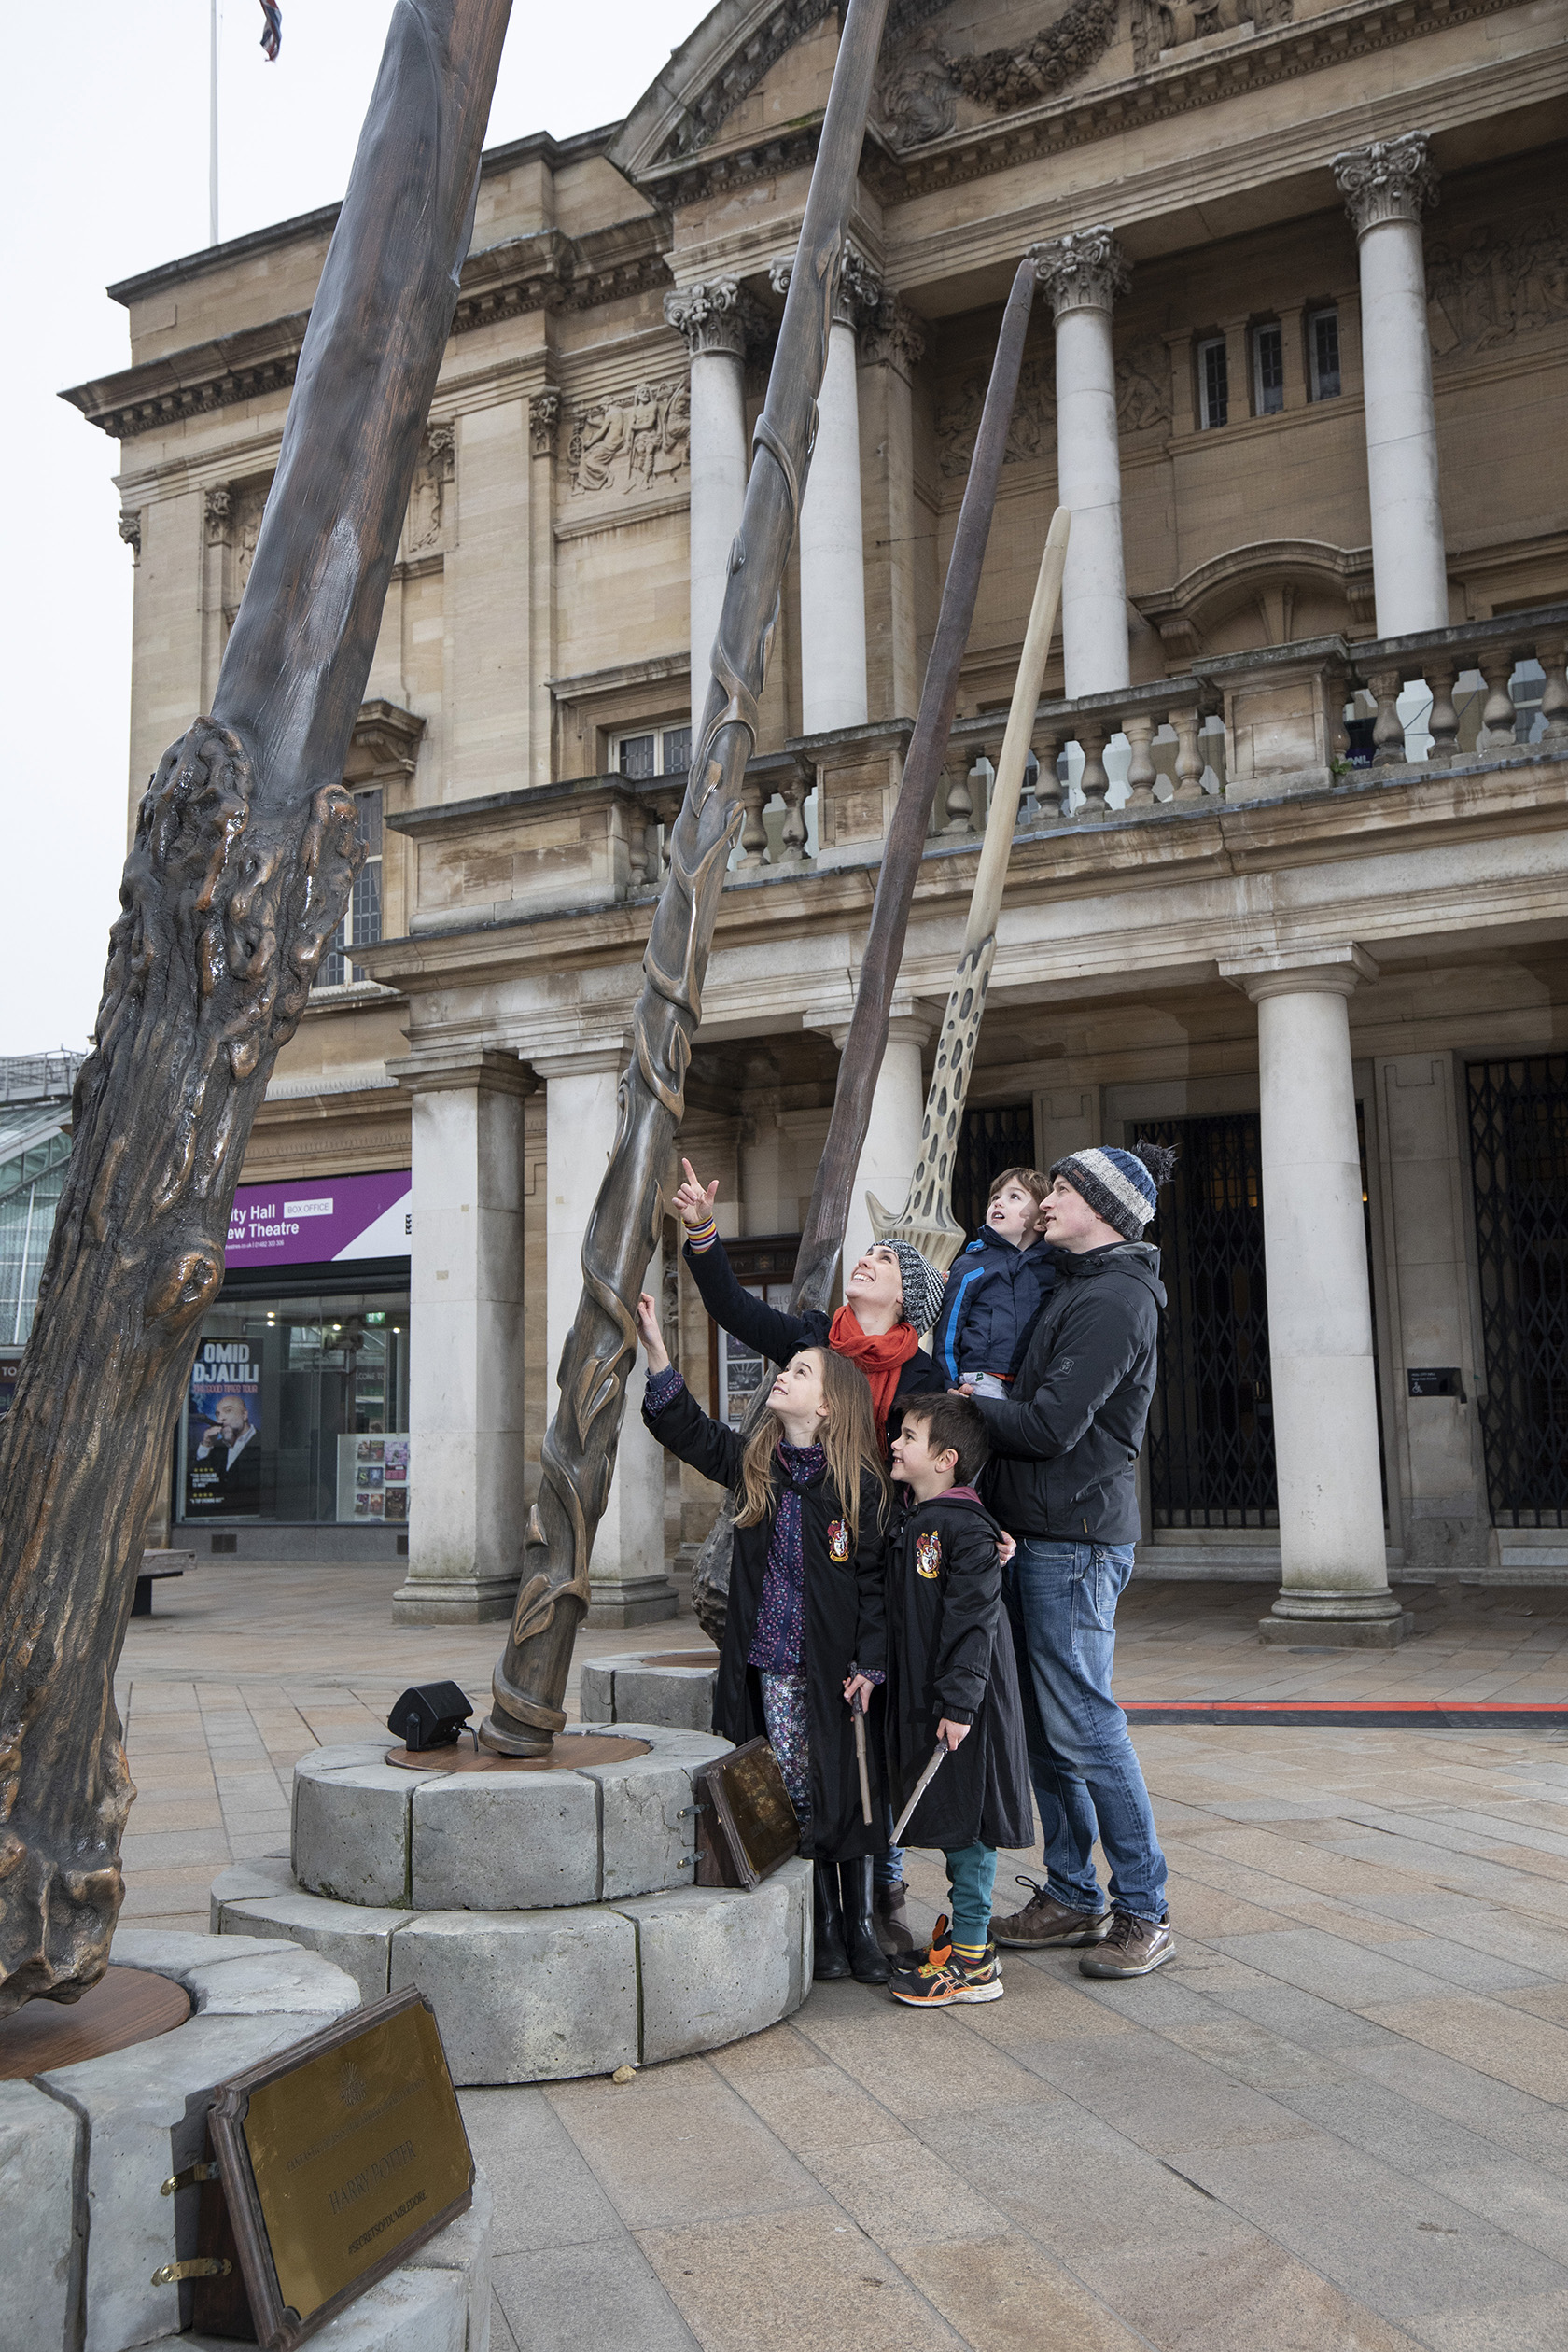 To celebrate the release of “Fantastic Beasts: The Secrets of Dumbledore,” nine 15-foot wands have been erected in Queen Victoria Square in Hull, England.